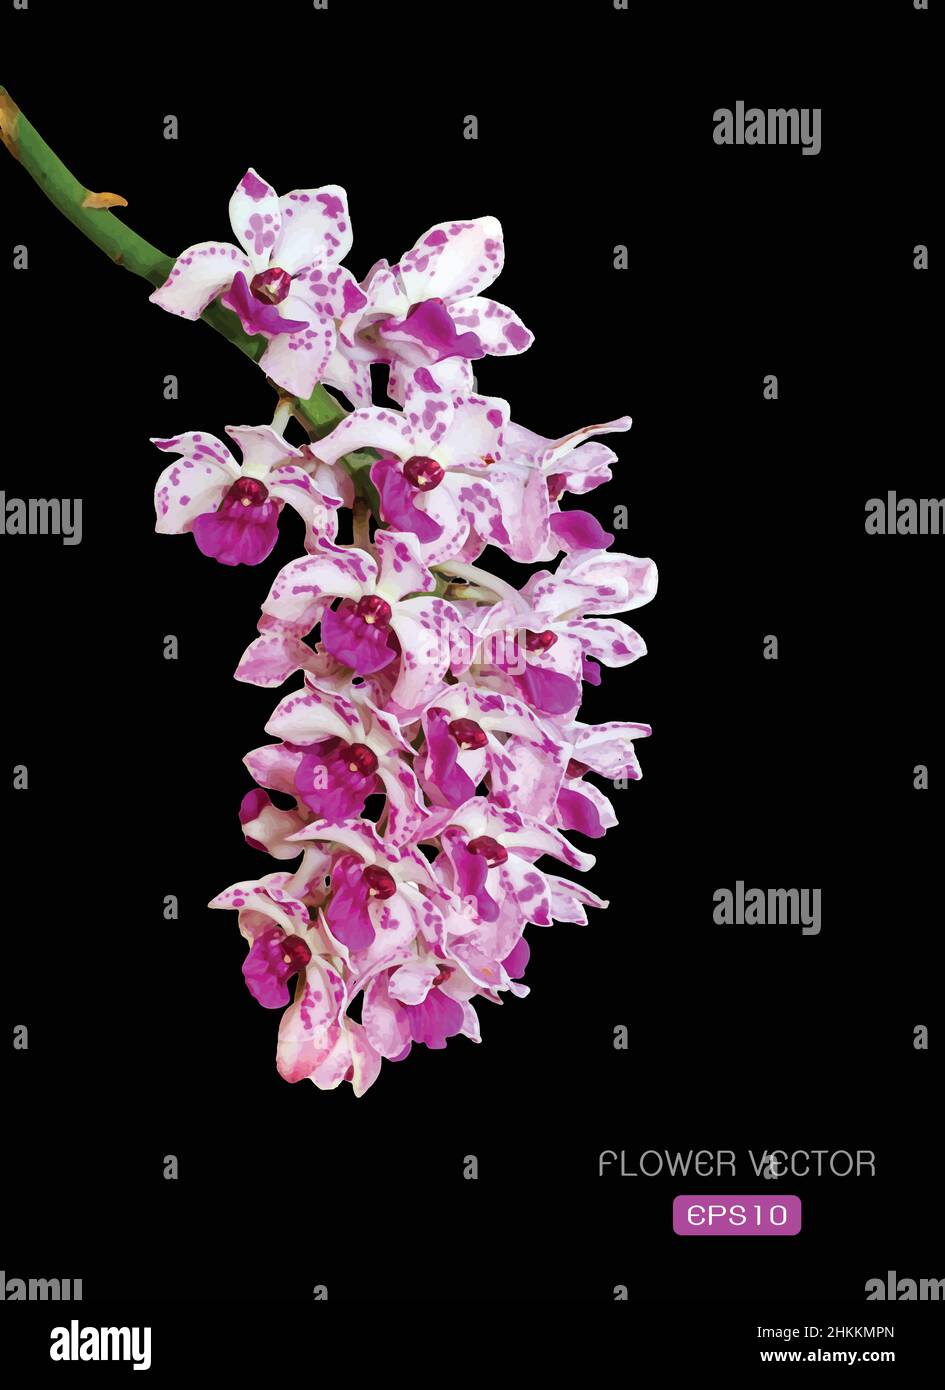 Vector image of orchid flower on black background. Easy editable layered vector illustration. Stock Vector